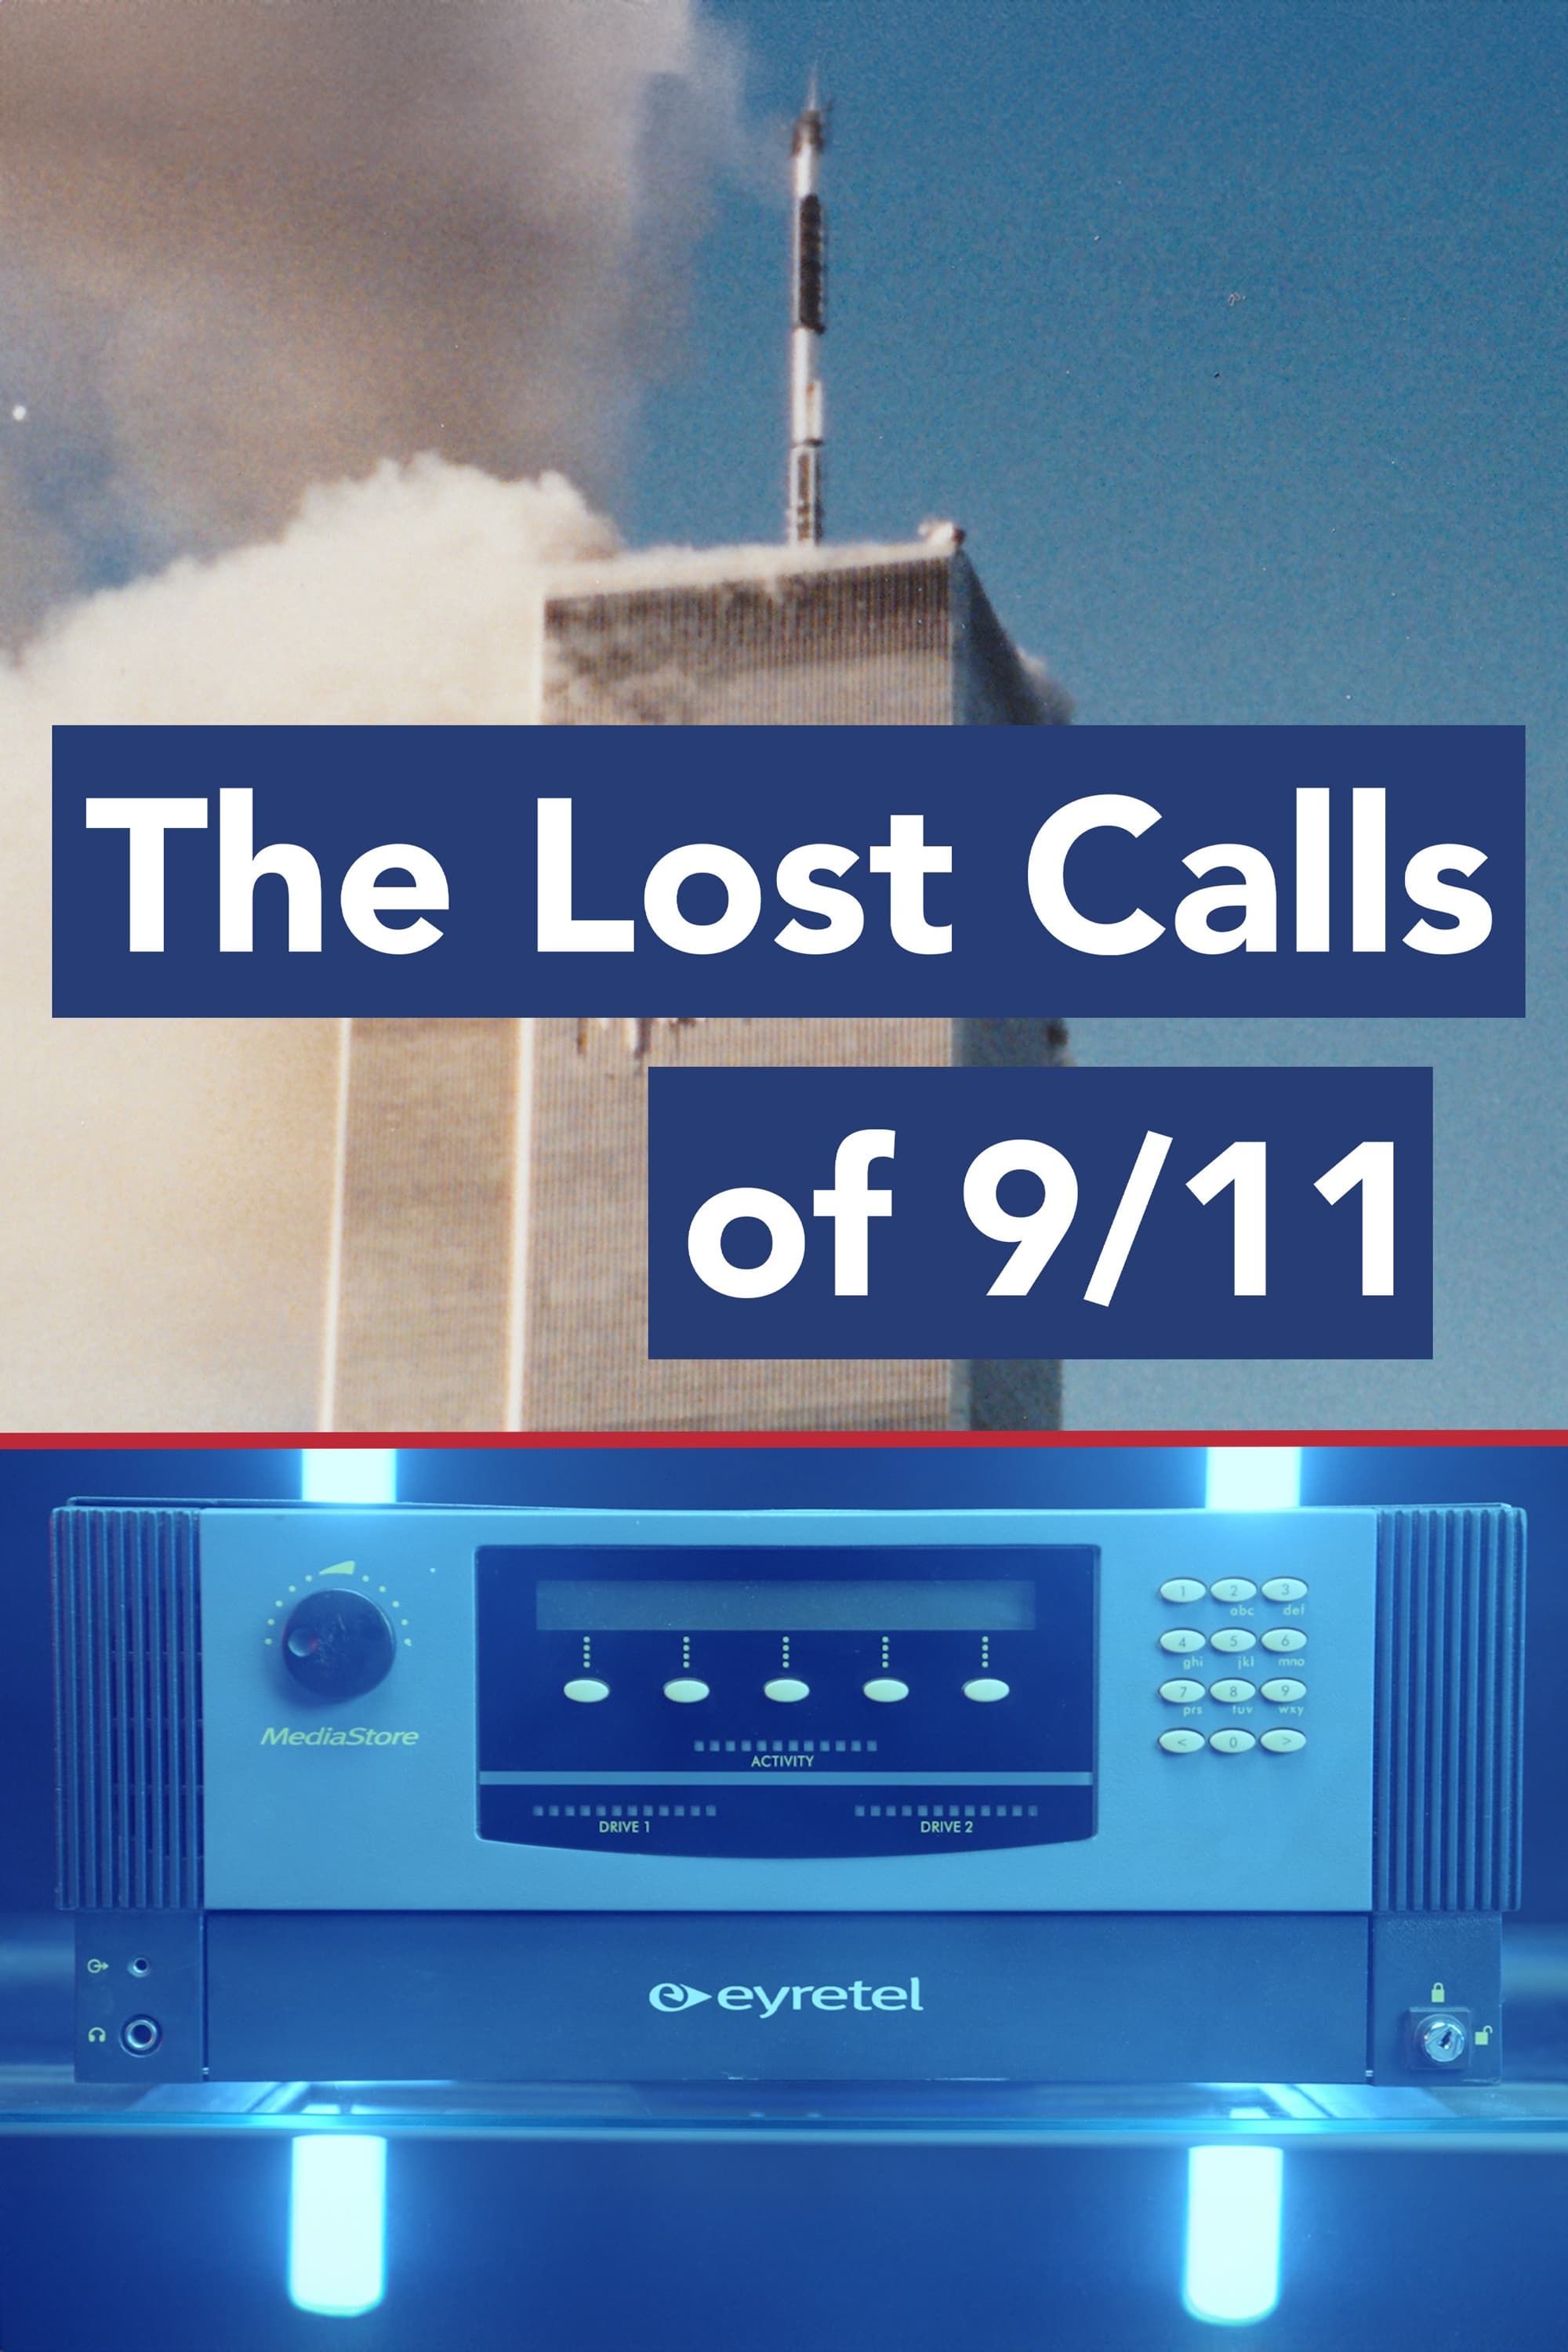 The Lost Calls of 9/11